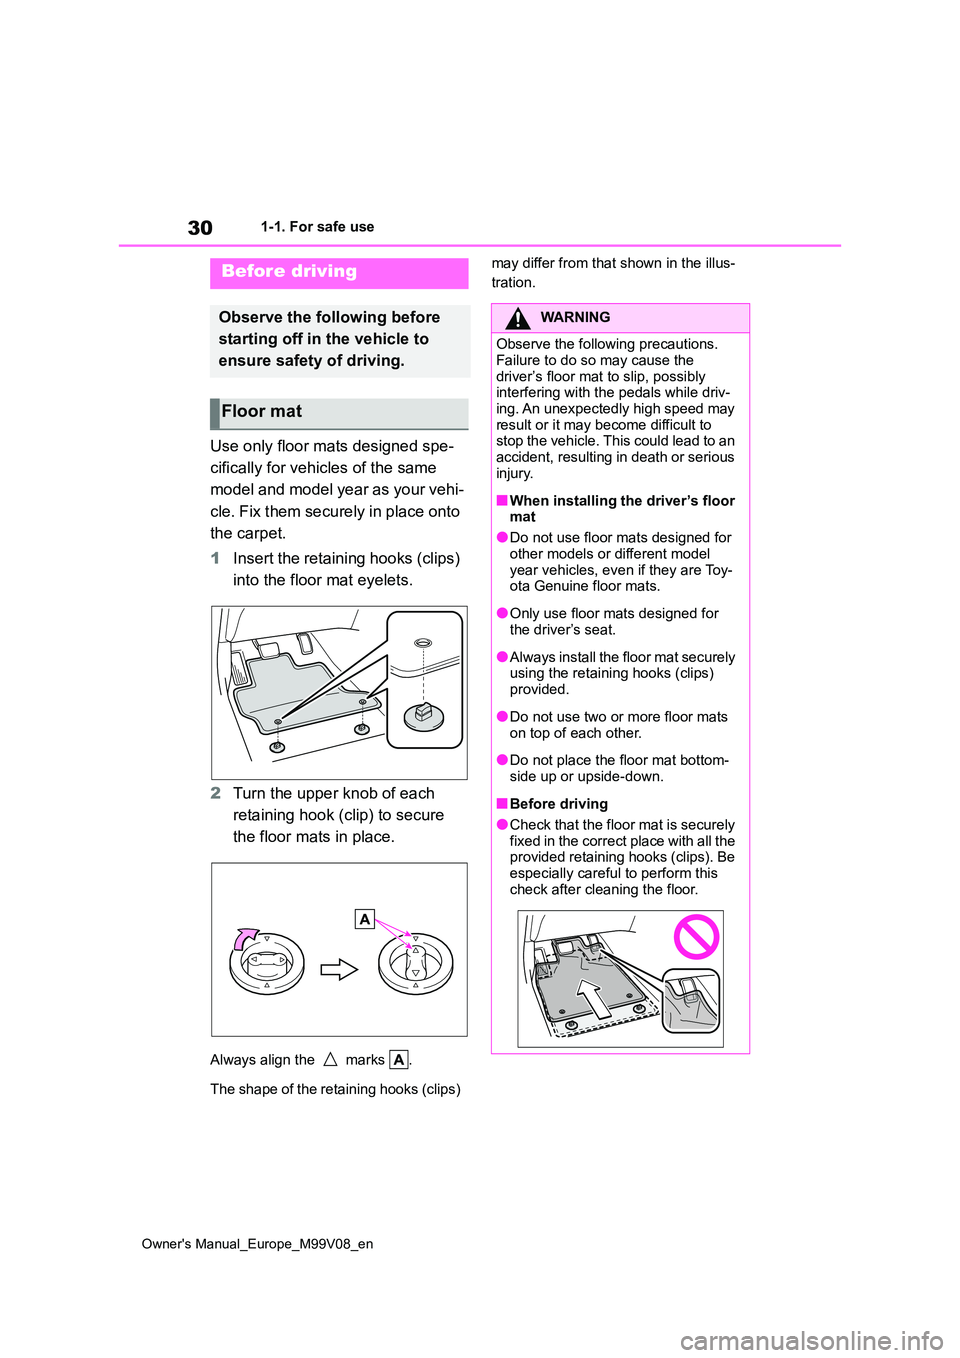 TOYOTA AYGO X 2022  Owners Manual (in English) 30
Owner's Manual_Europe_M99V08_en
1-1. For safe use
1-1.For s afe  us e
Use only floor mats designed spe- 
cifically for vehicles of the same  
model and model year as your vehi- 
cle. Fix them s